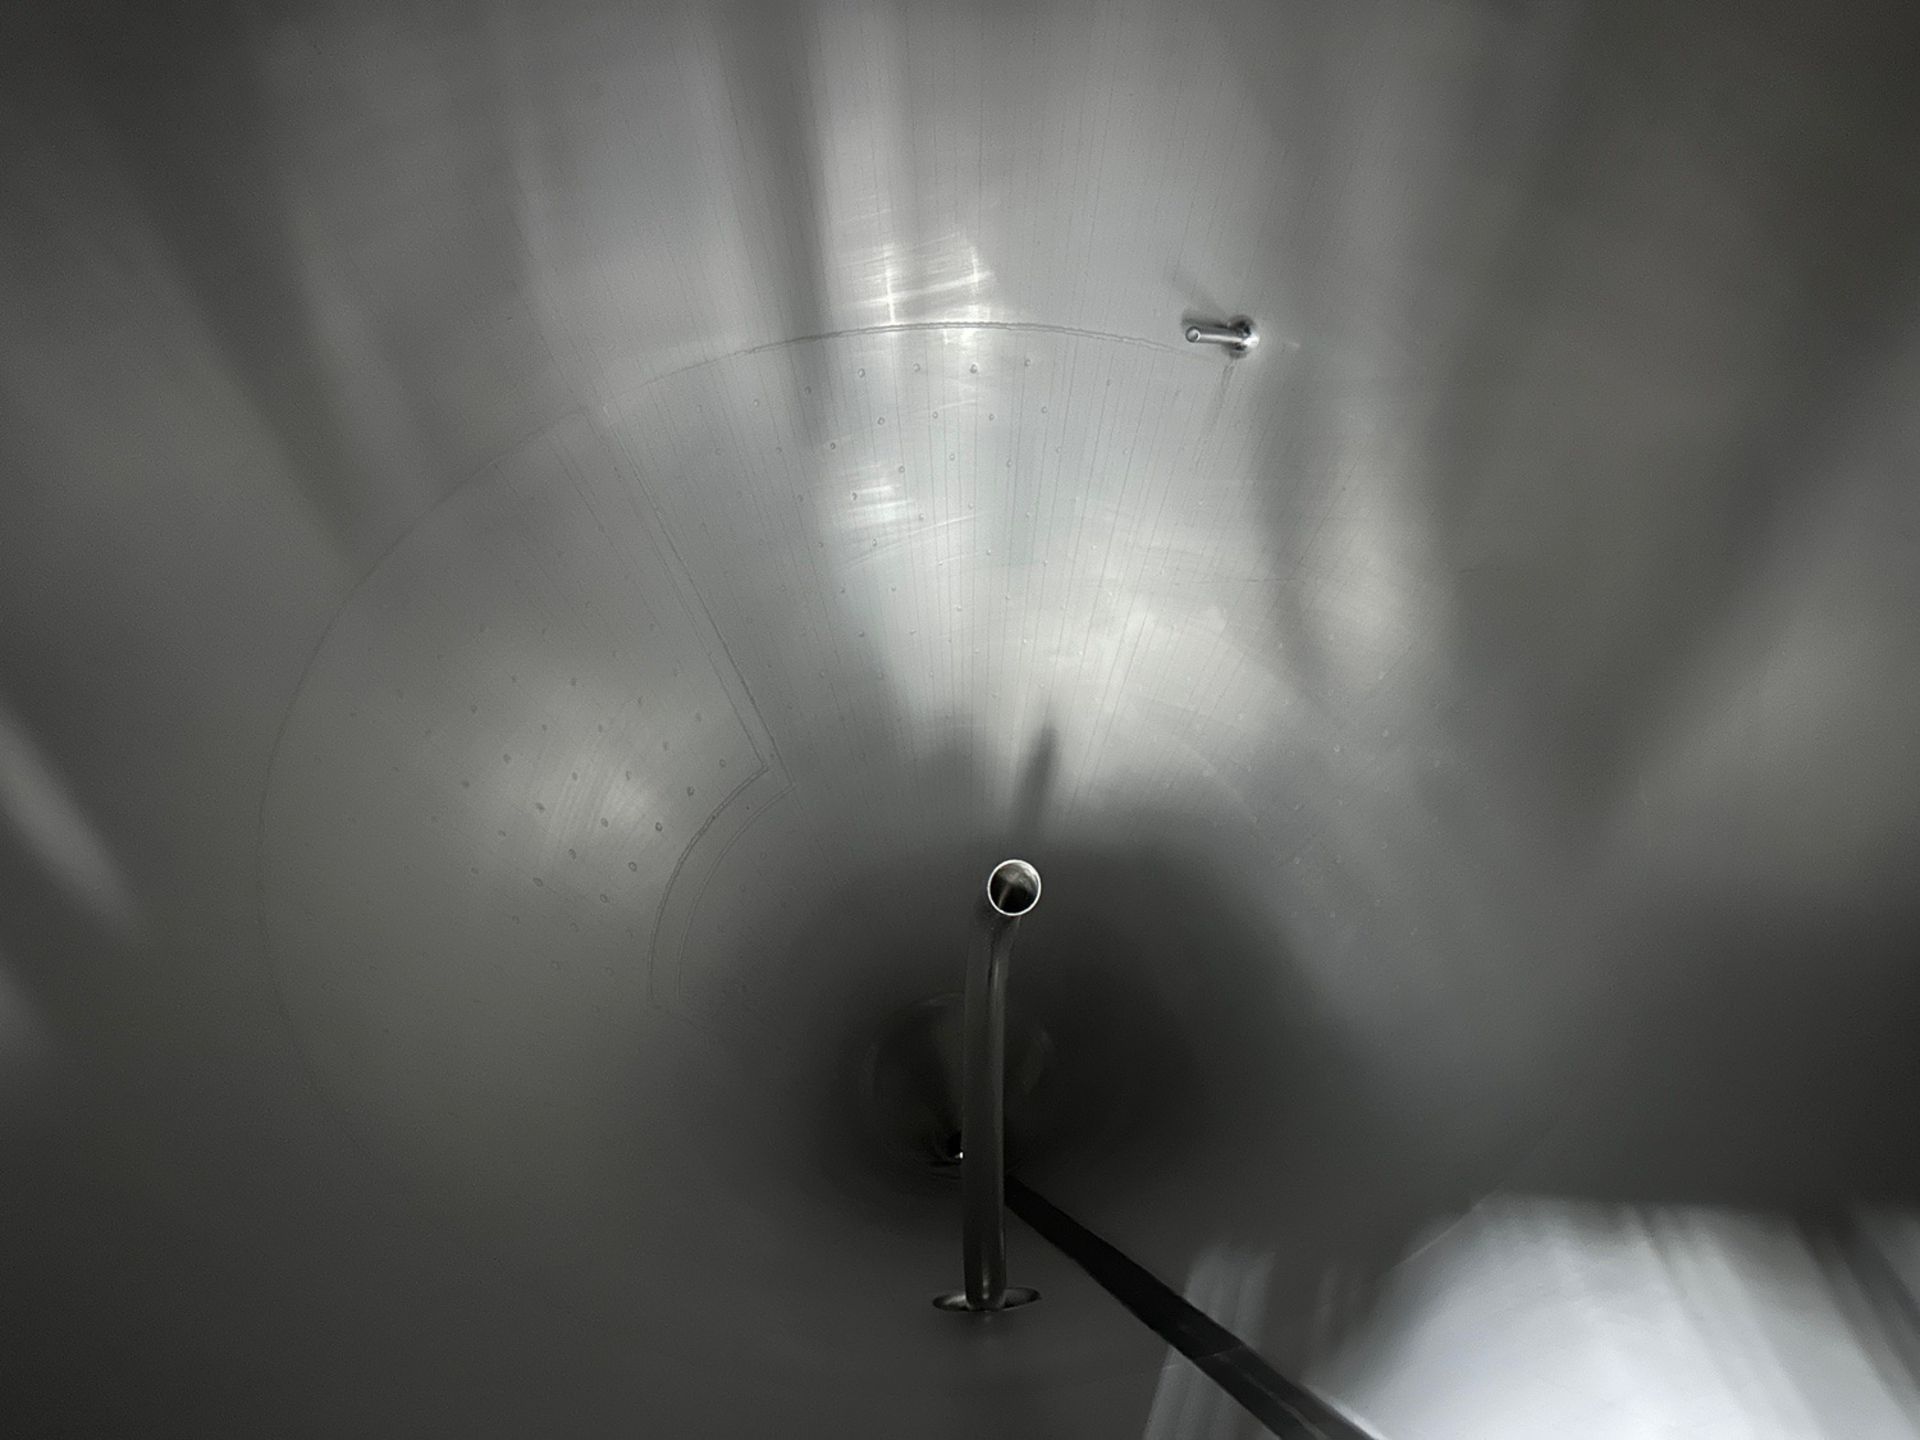 Premier Stainless 80 BBL Stainless Steel Fermentation Tank - Cone Bottom, Glycol Ja | Rig Fee $1850 - Image 3 of 4